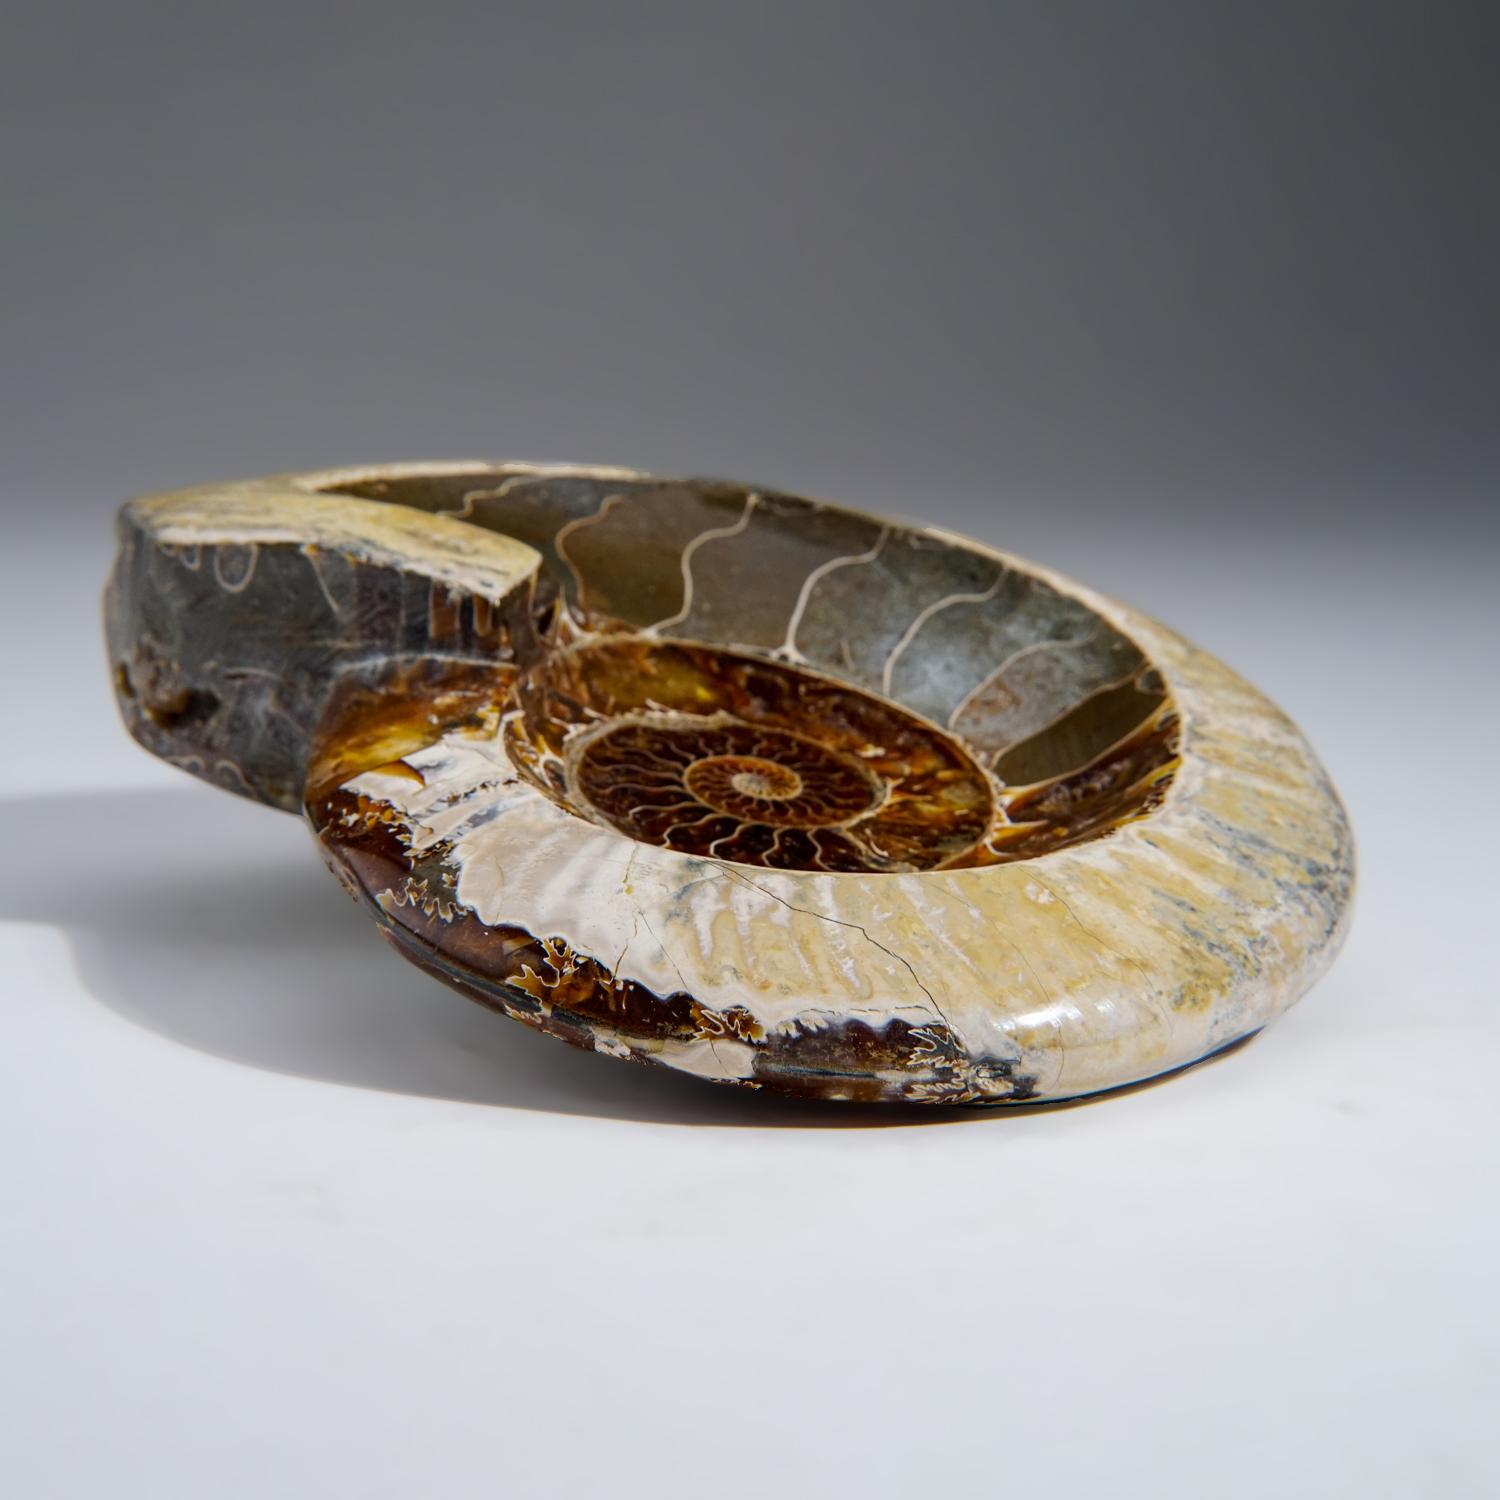 A stunning polished Madagascan Cleoniceras ammonite fossil has been carved out to create a dish. There is second agatized ammonite inlaid into the center of the large one. It could be used as a very unique dish, bowl or ashtray. Wonderful gift for